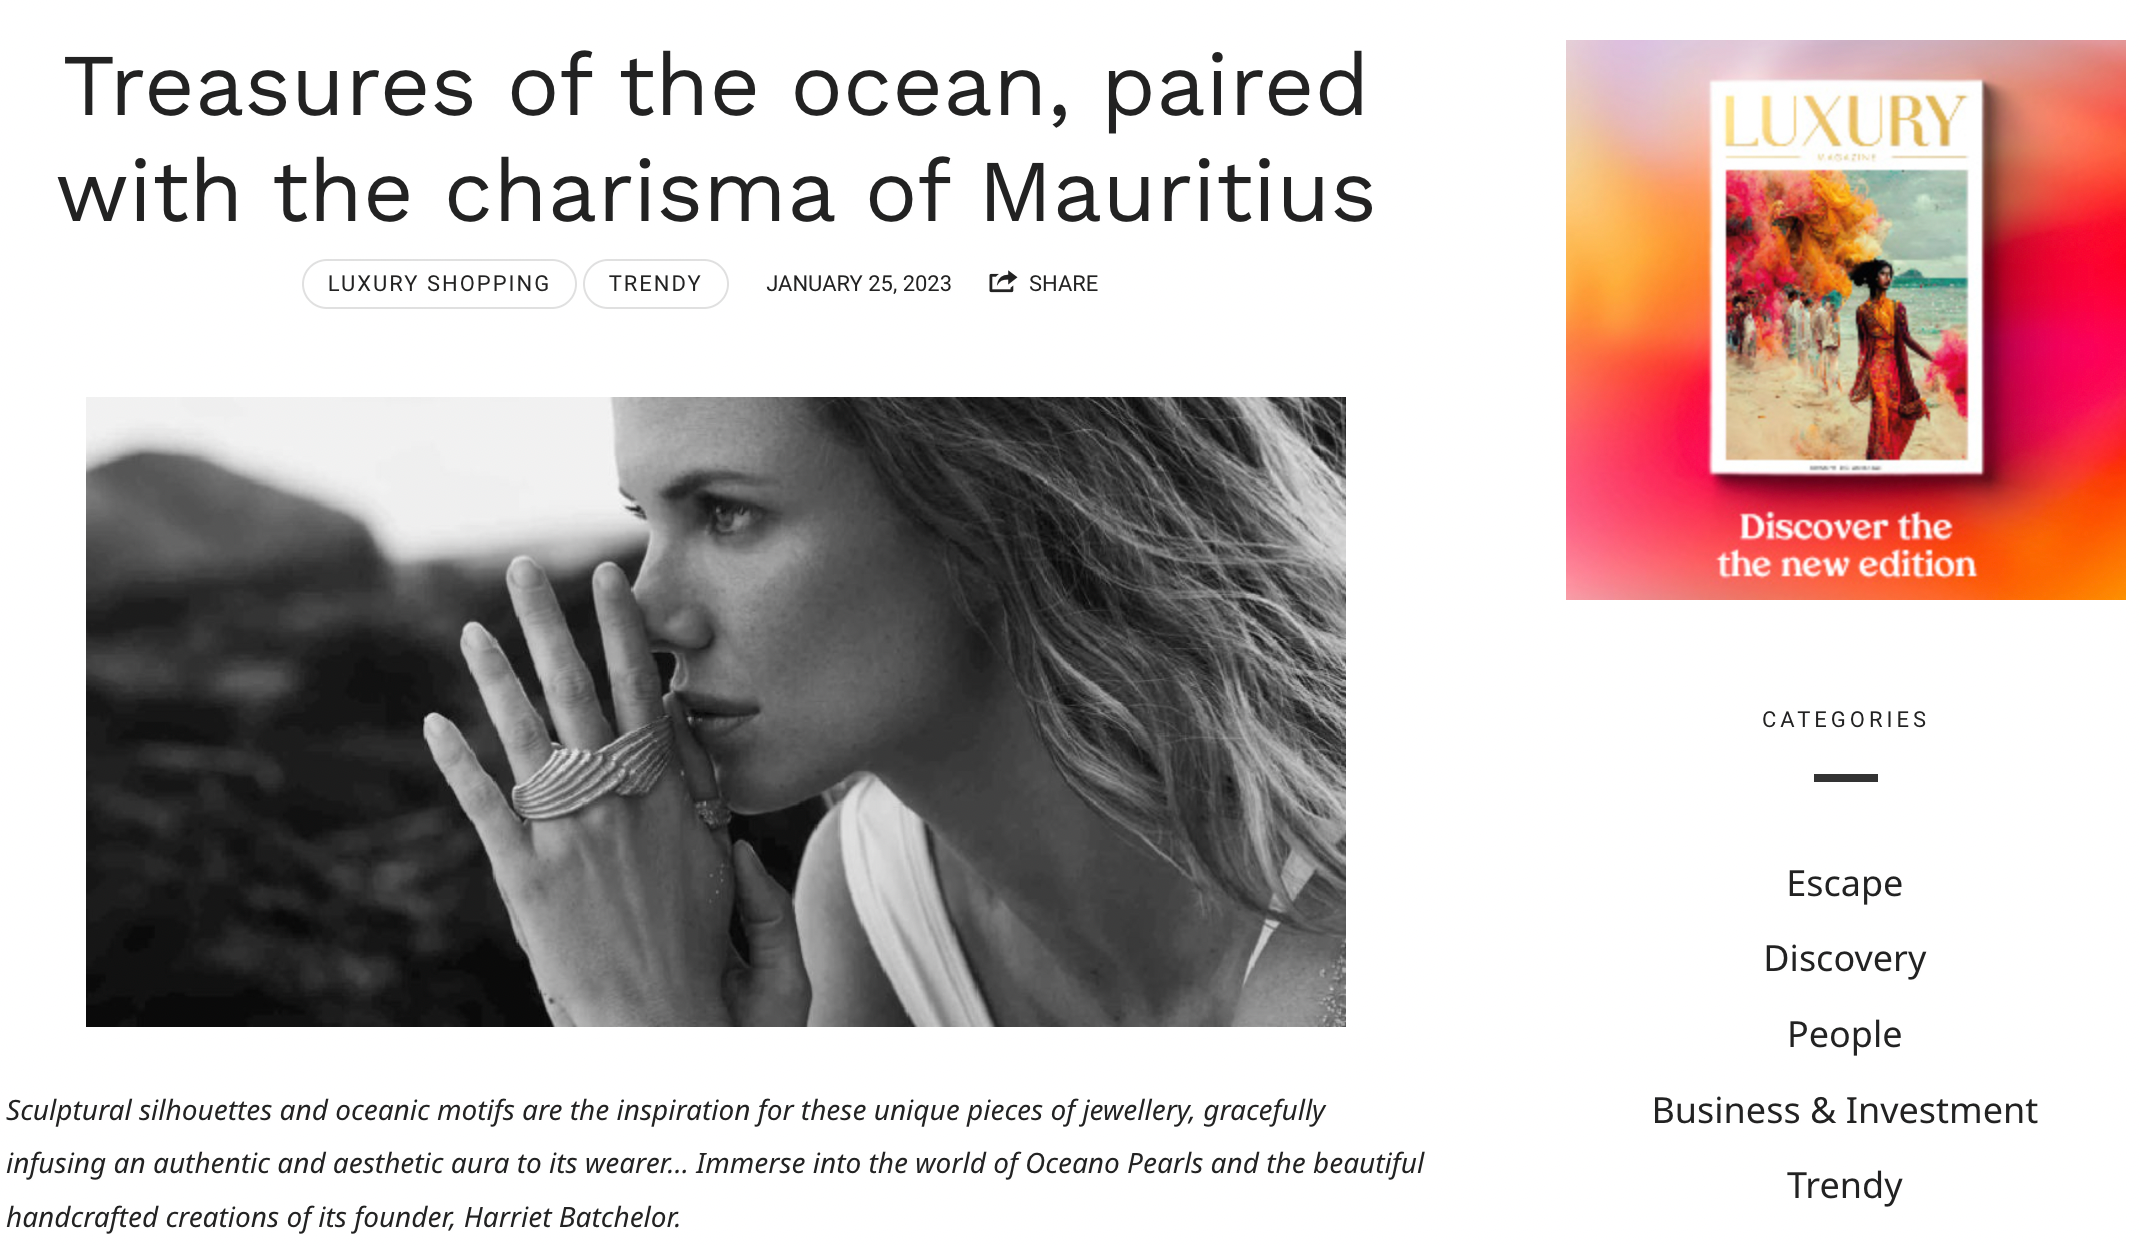 Luxury Magazine - Treasures of the ocean, paired with the charisma of Mauritius